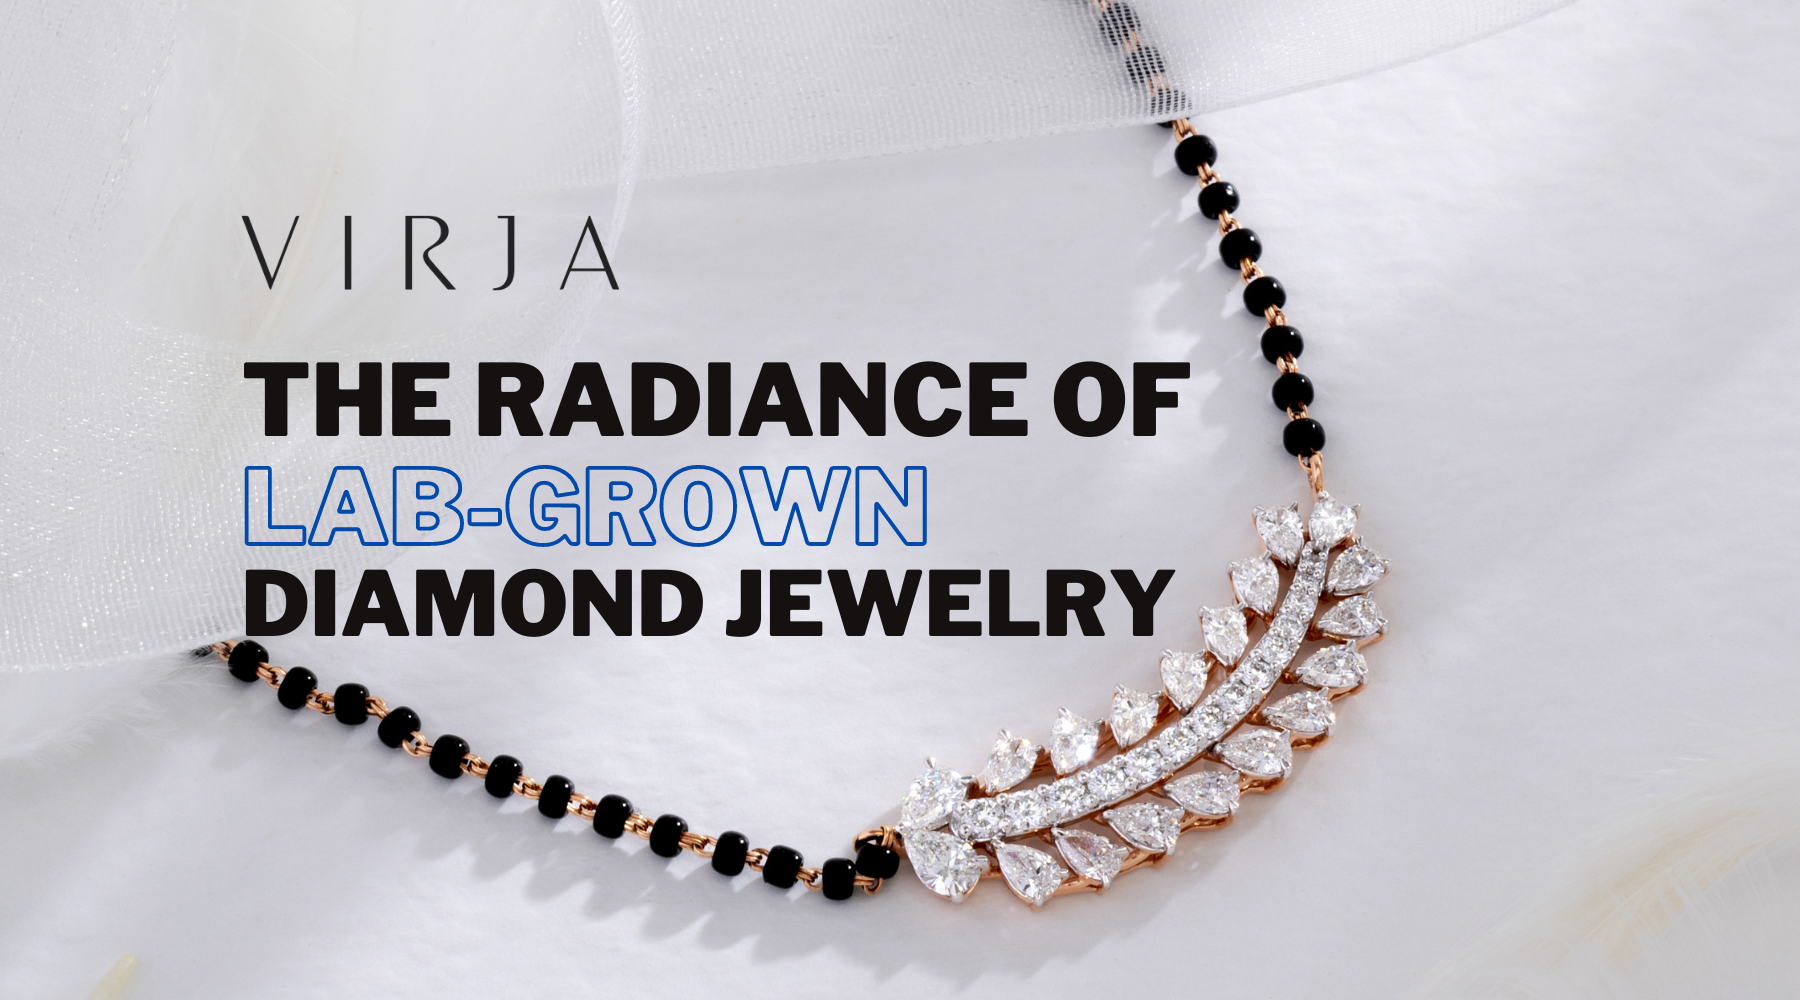 Blog banner for post on the radiance of lab-grown diamond jewelry by Virja